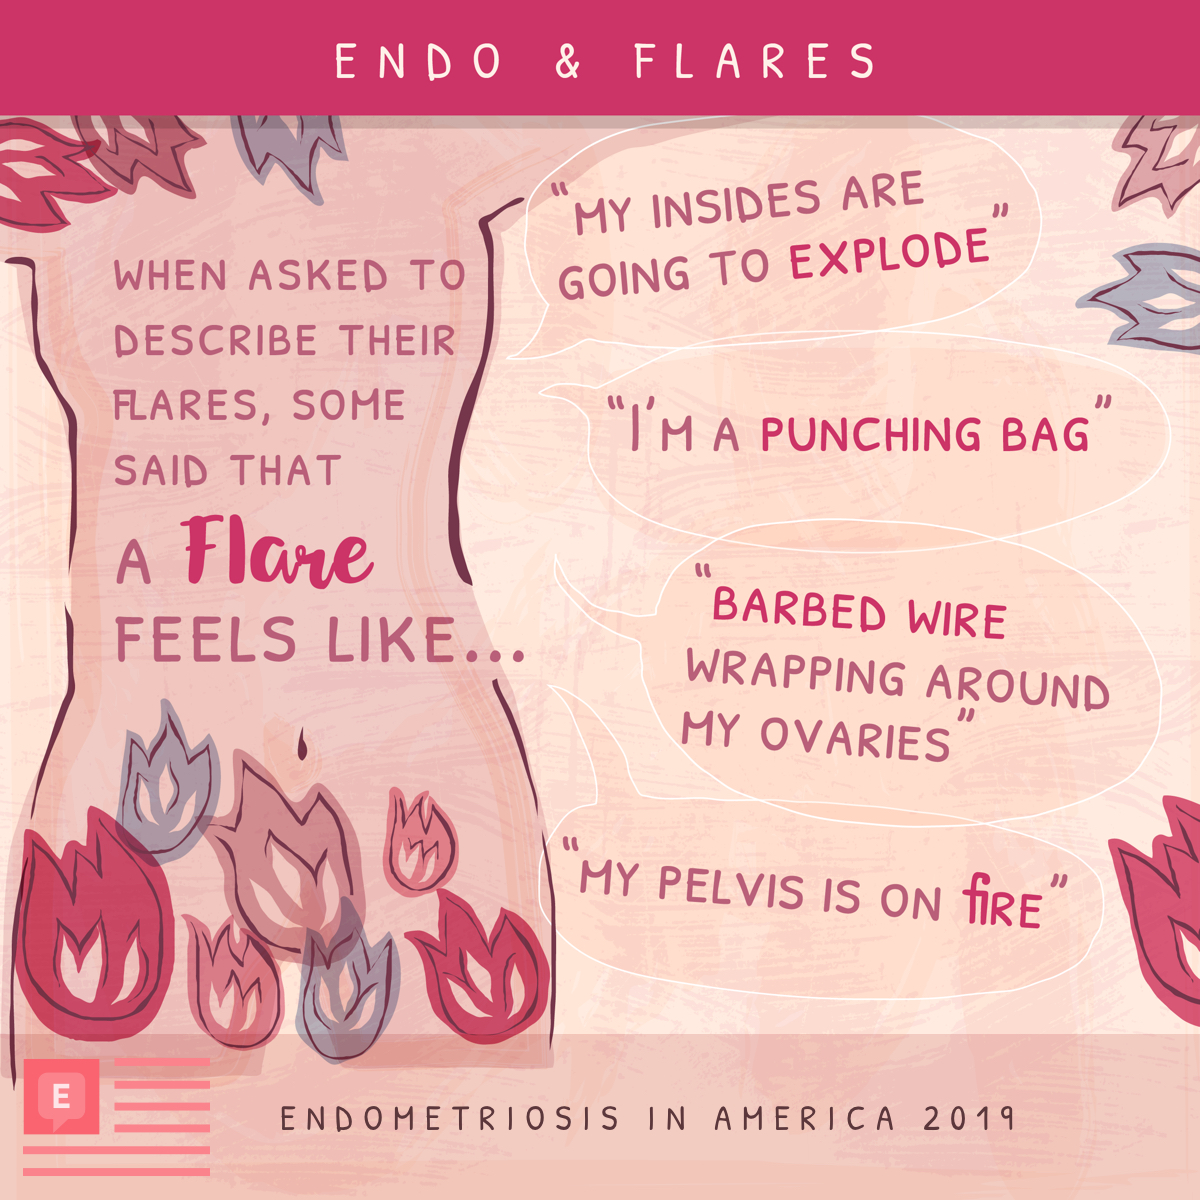 Endo flares feel like: insides exploding, being a punching bag, barbed wire around ovaries, pelvis on fire.